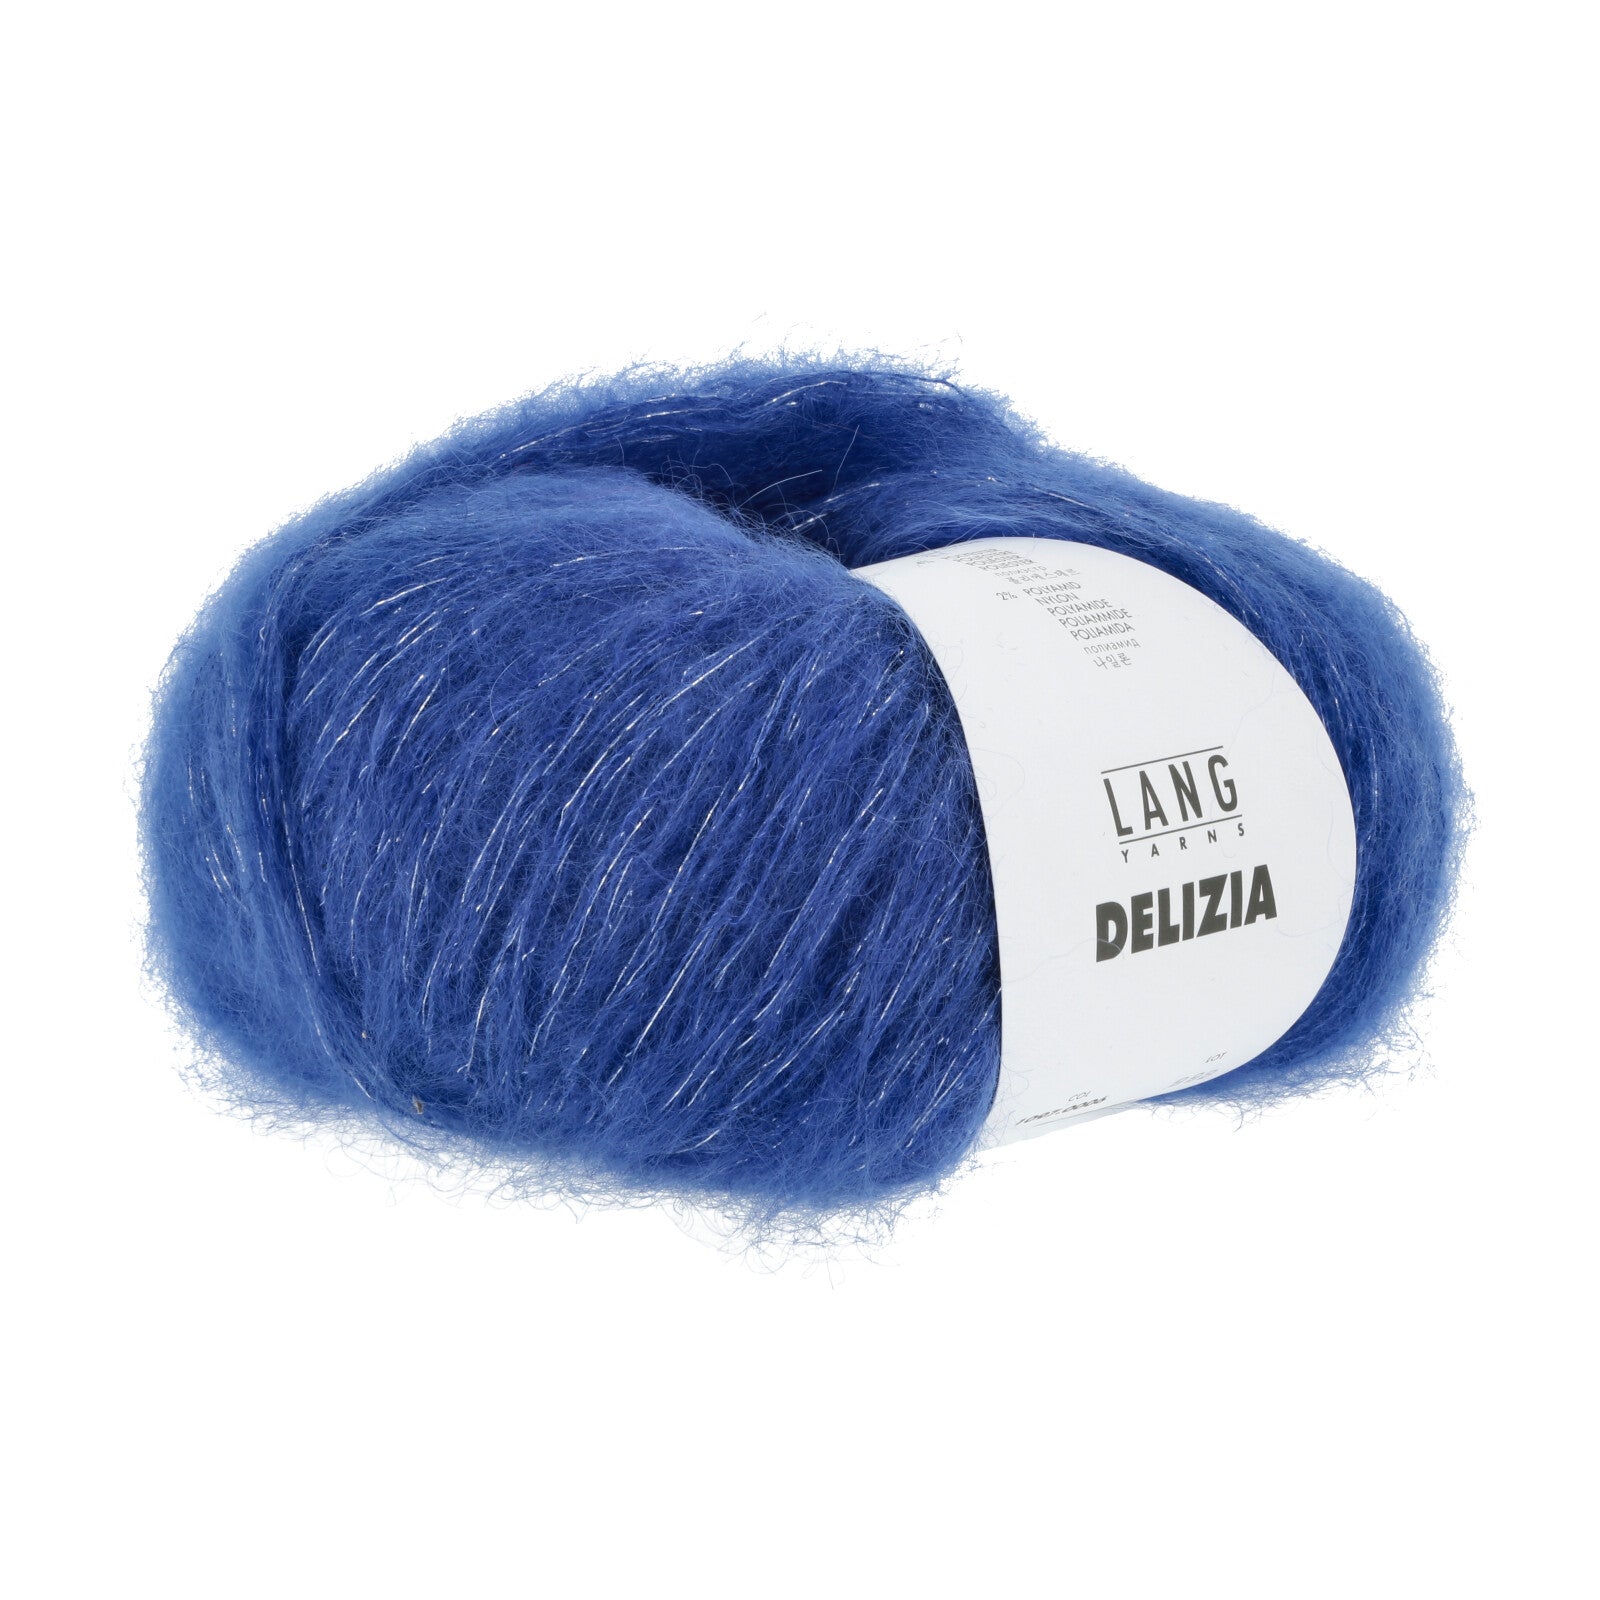 Photo of Lang Delizia yarn in Sapphire